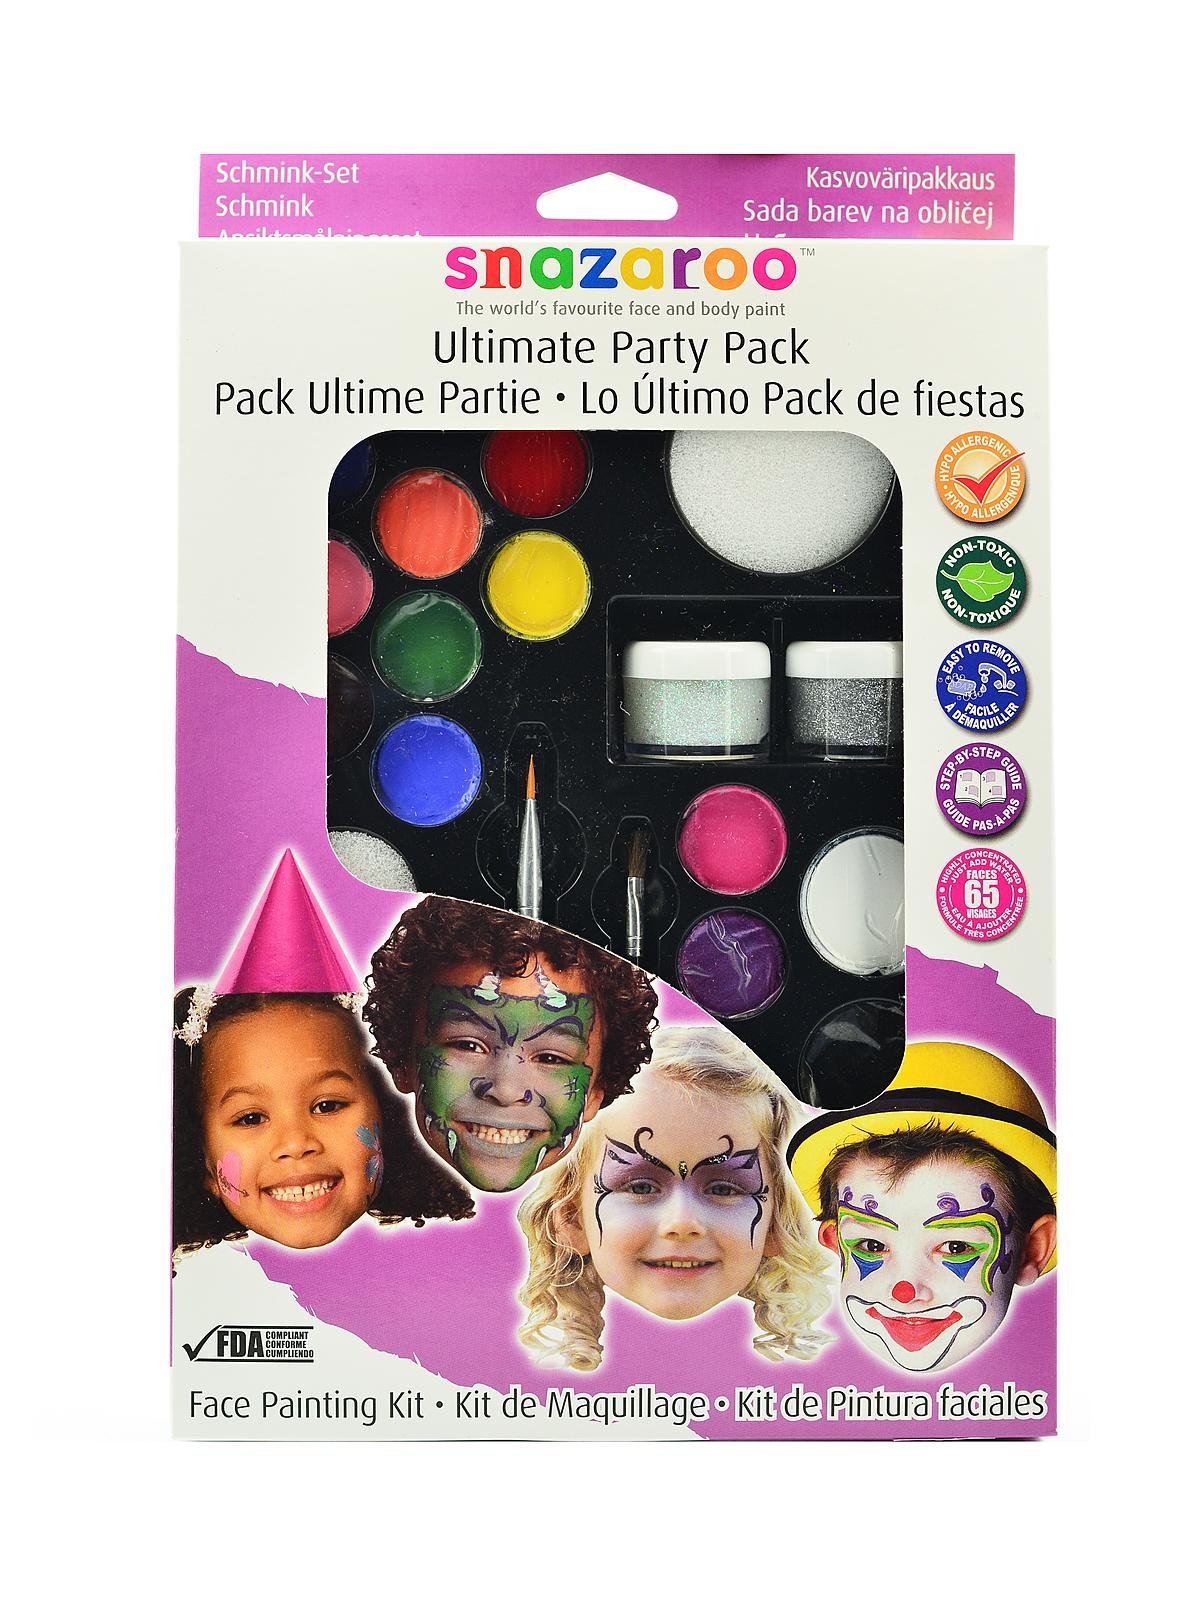 Special FX Face Painting Kit - The Art Store/Commercial Art Supply